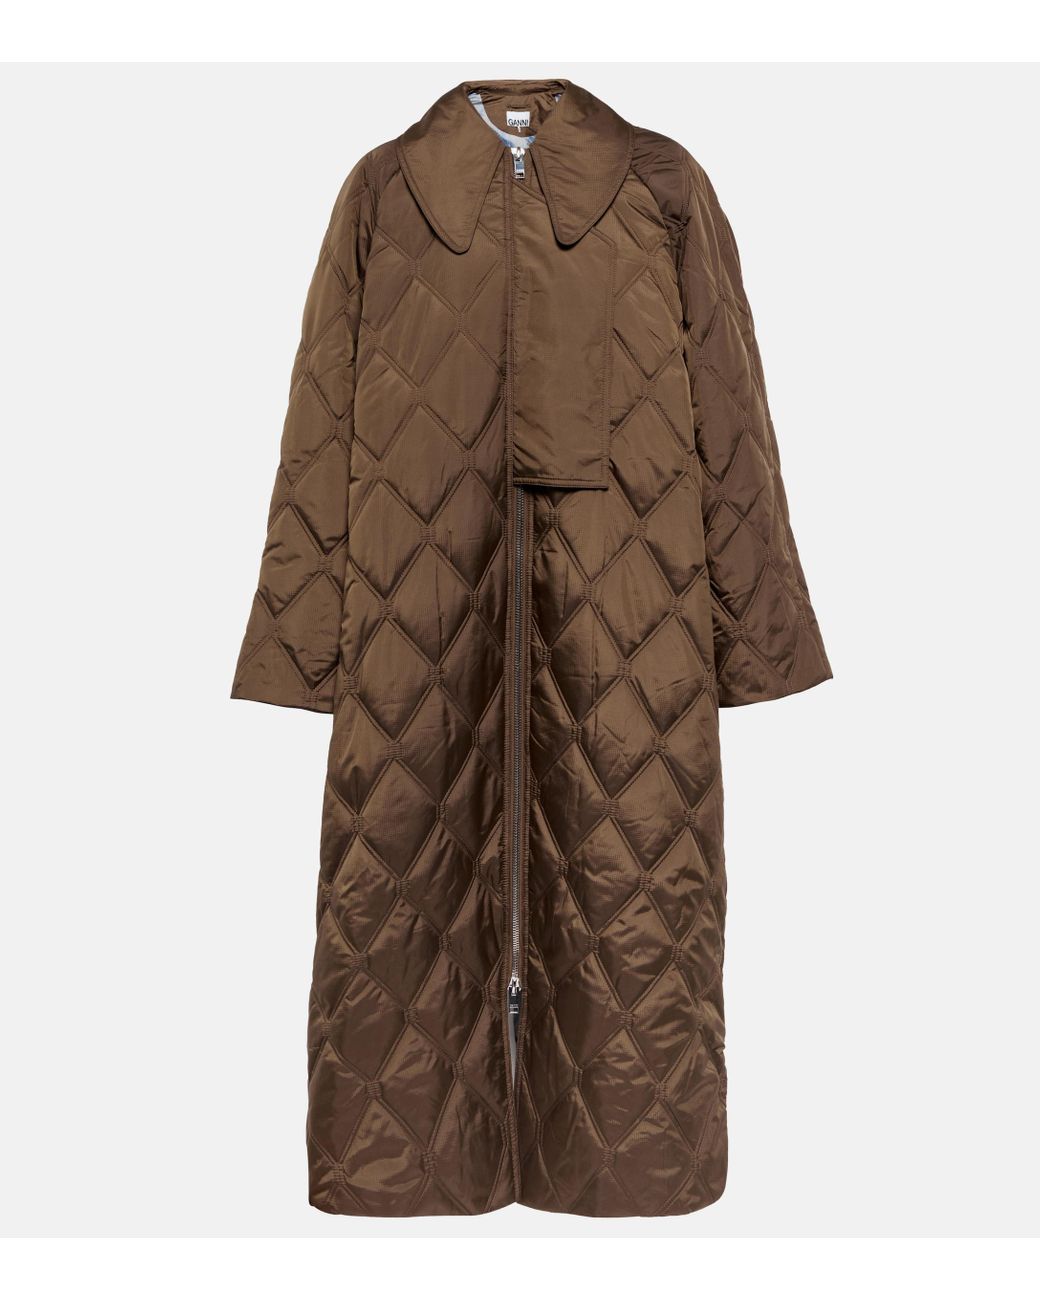 Ganni Oversized Quilted Coat in Brown | Lyst Australia